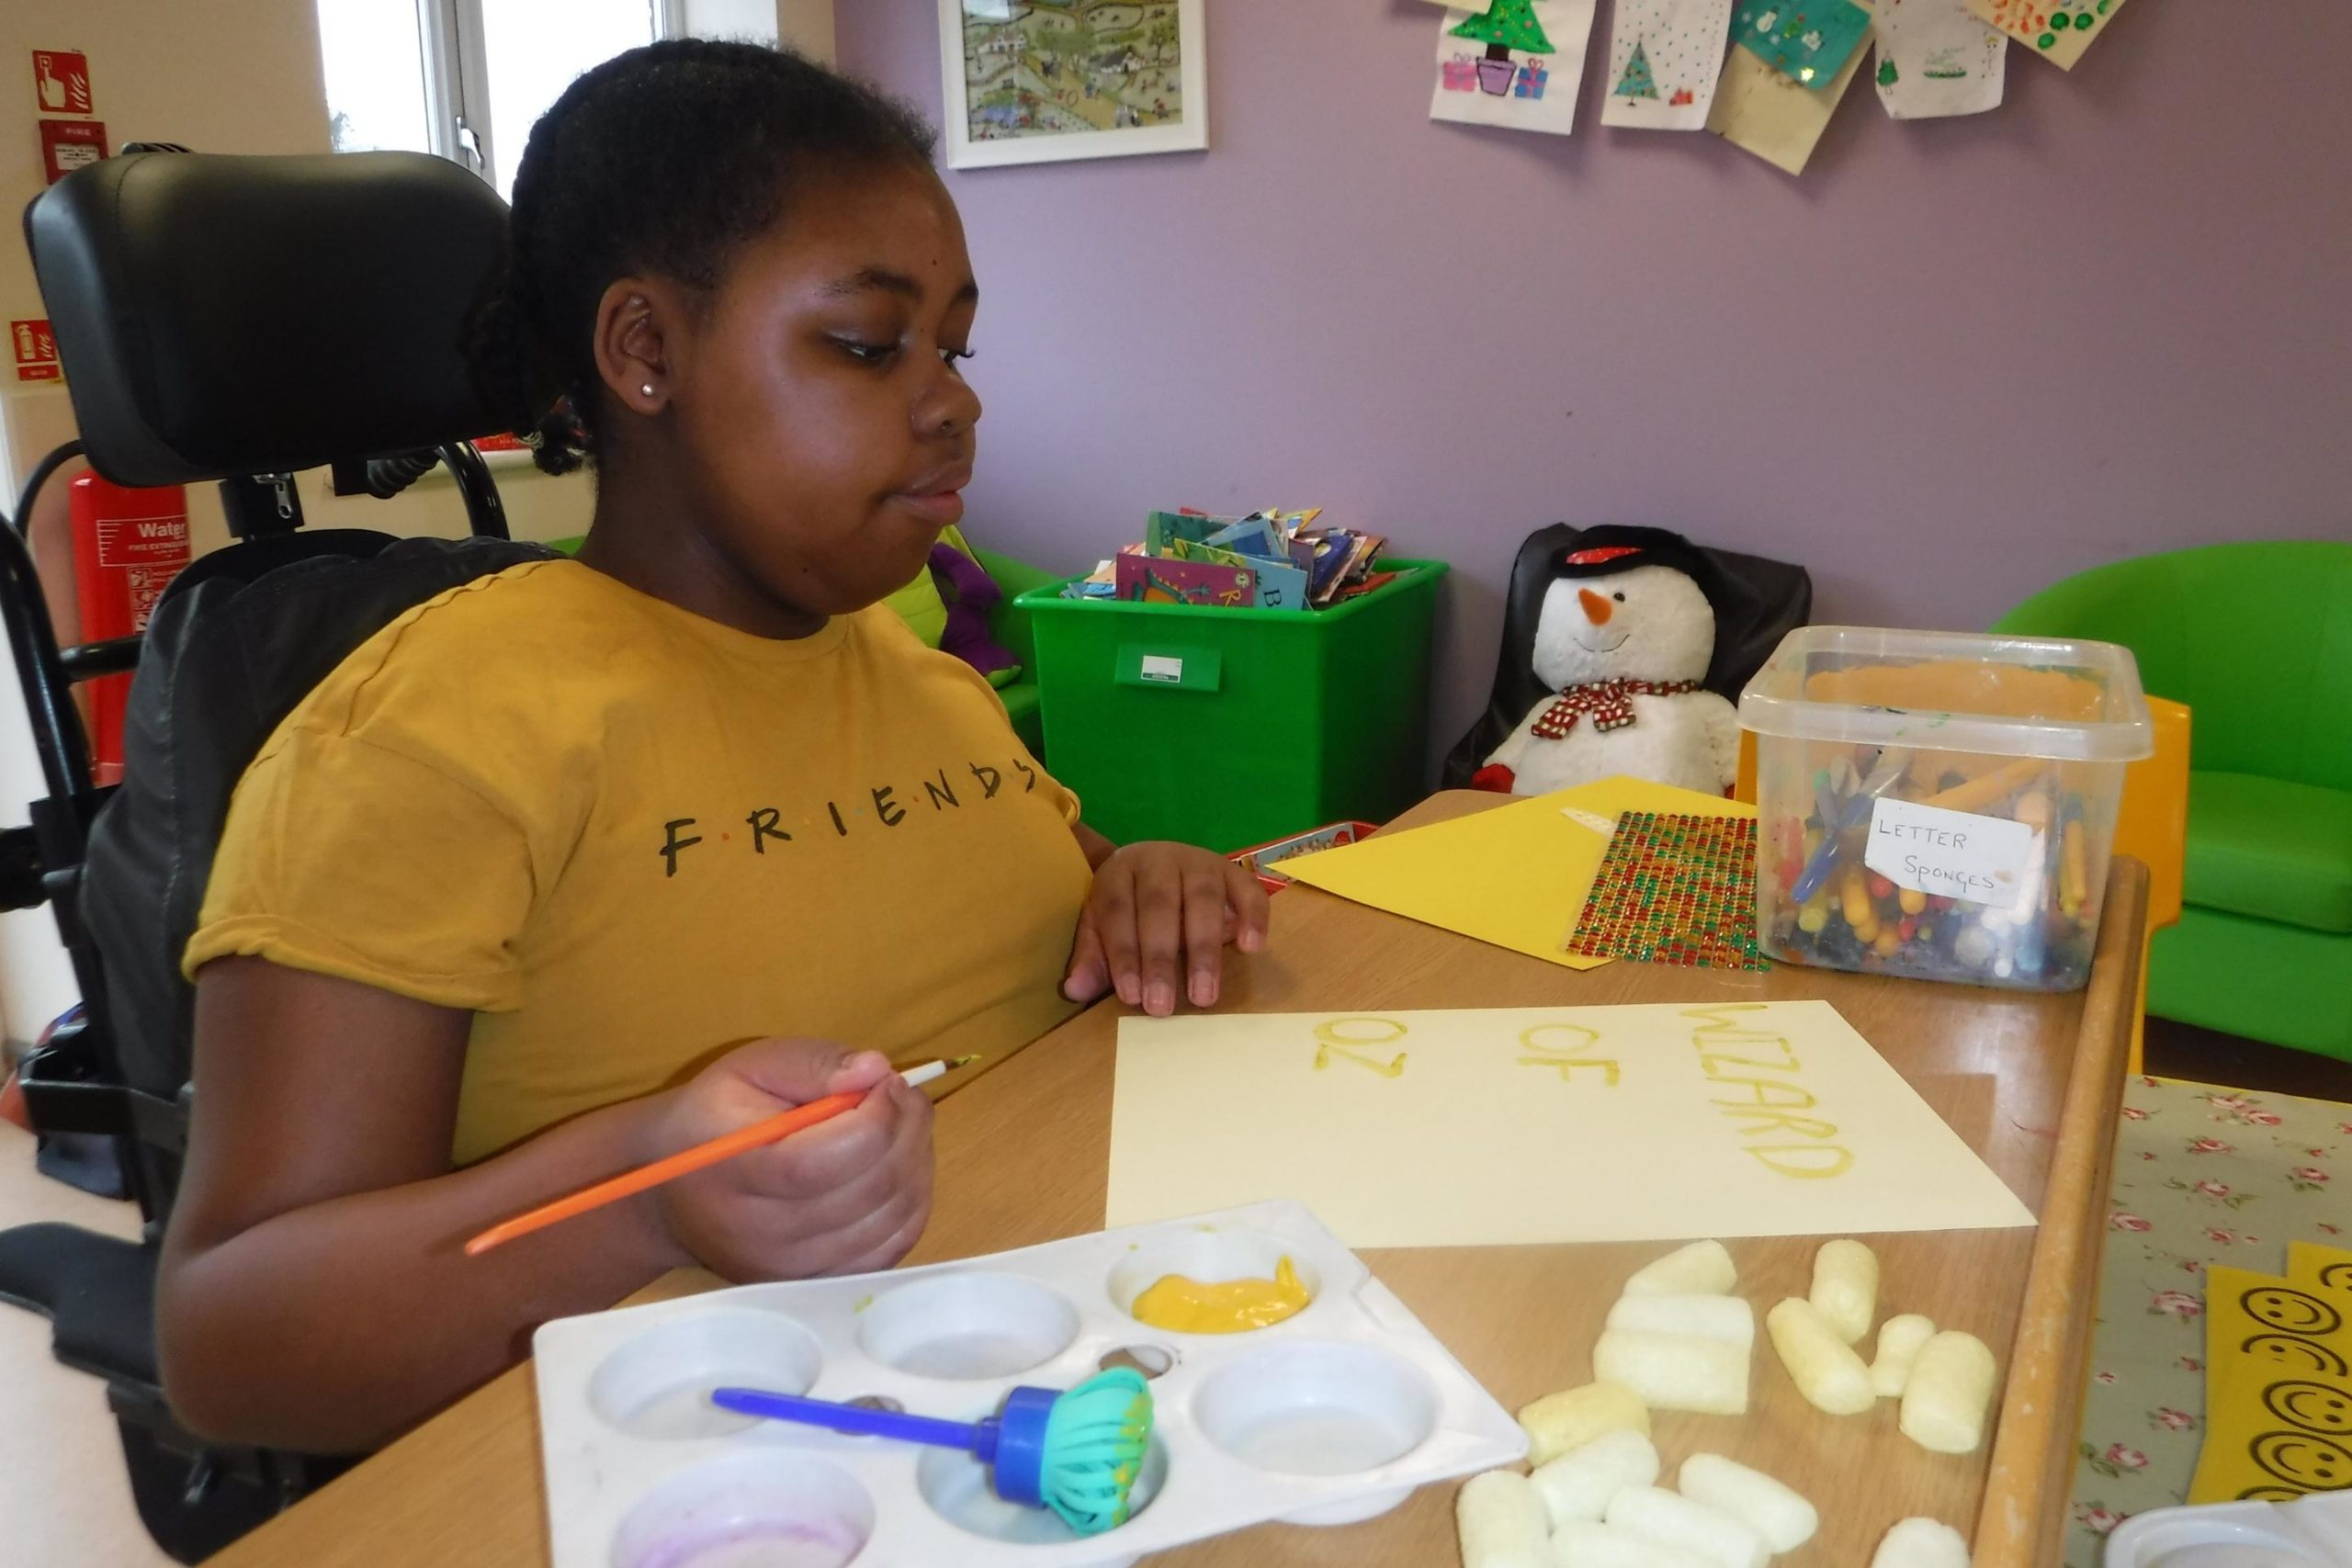 A young girl doing arts and crafts